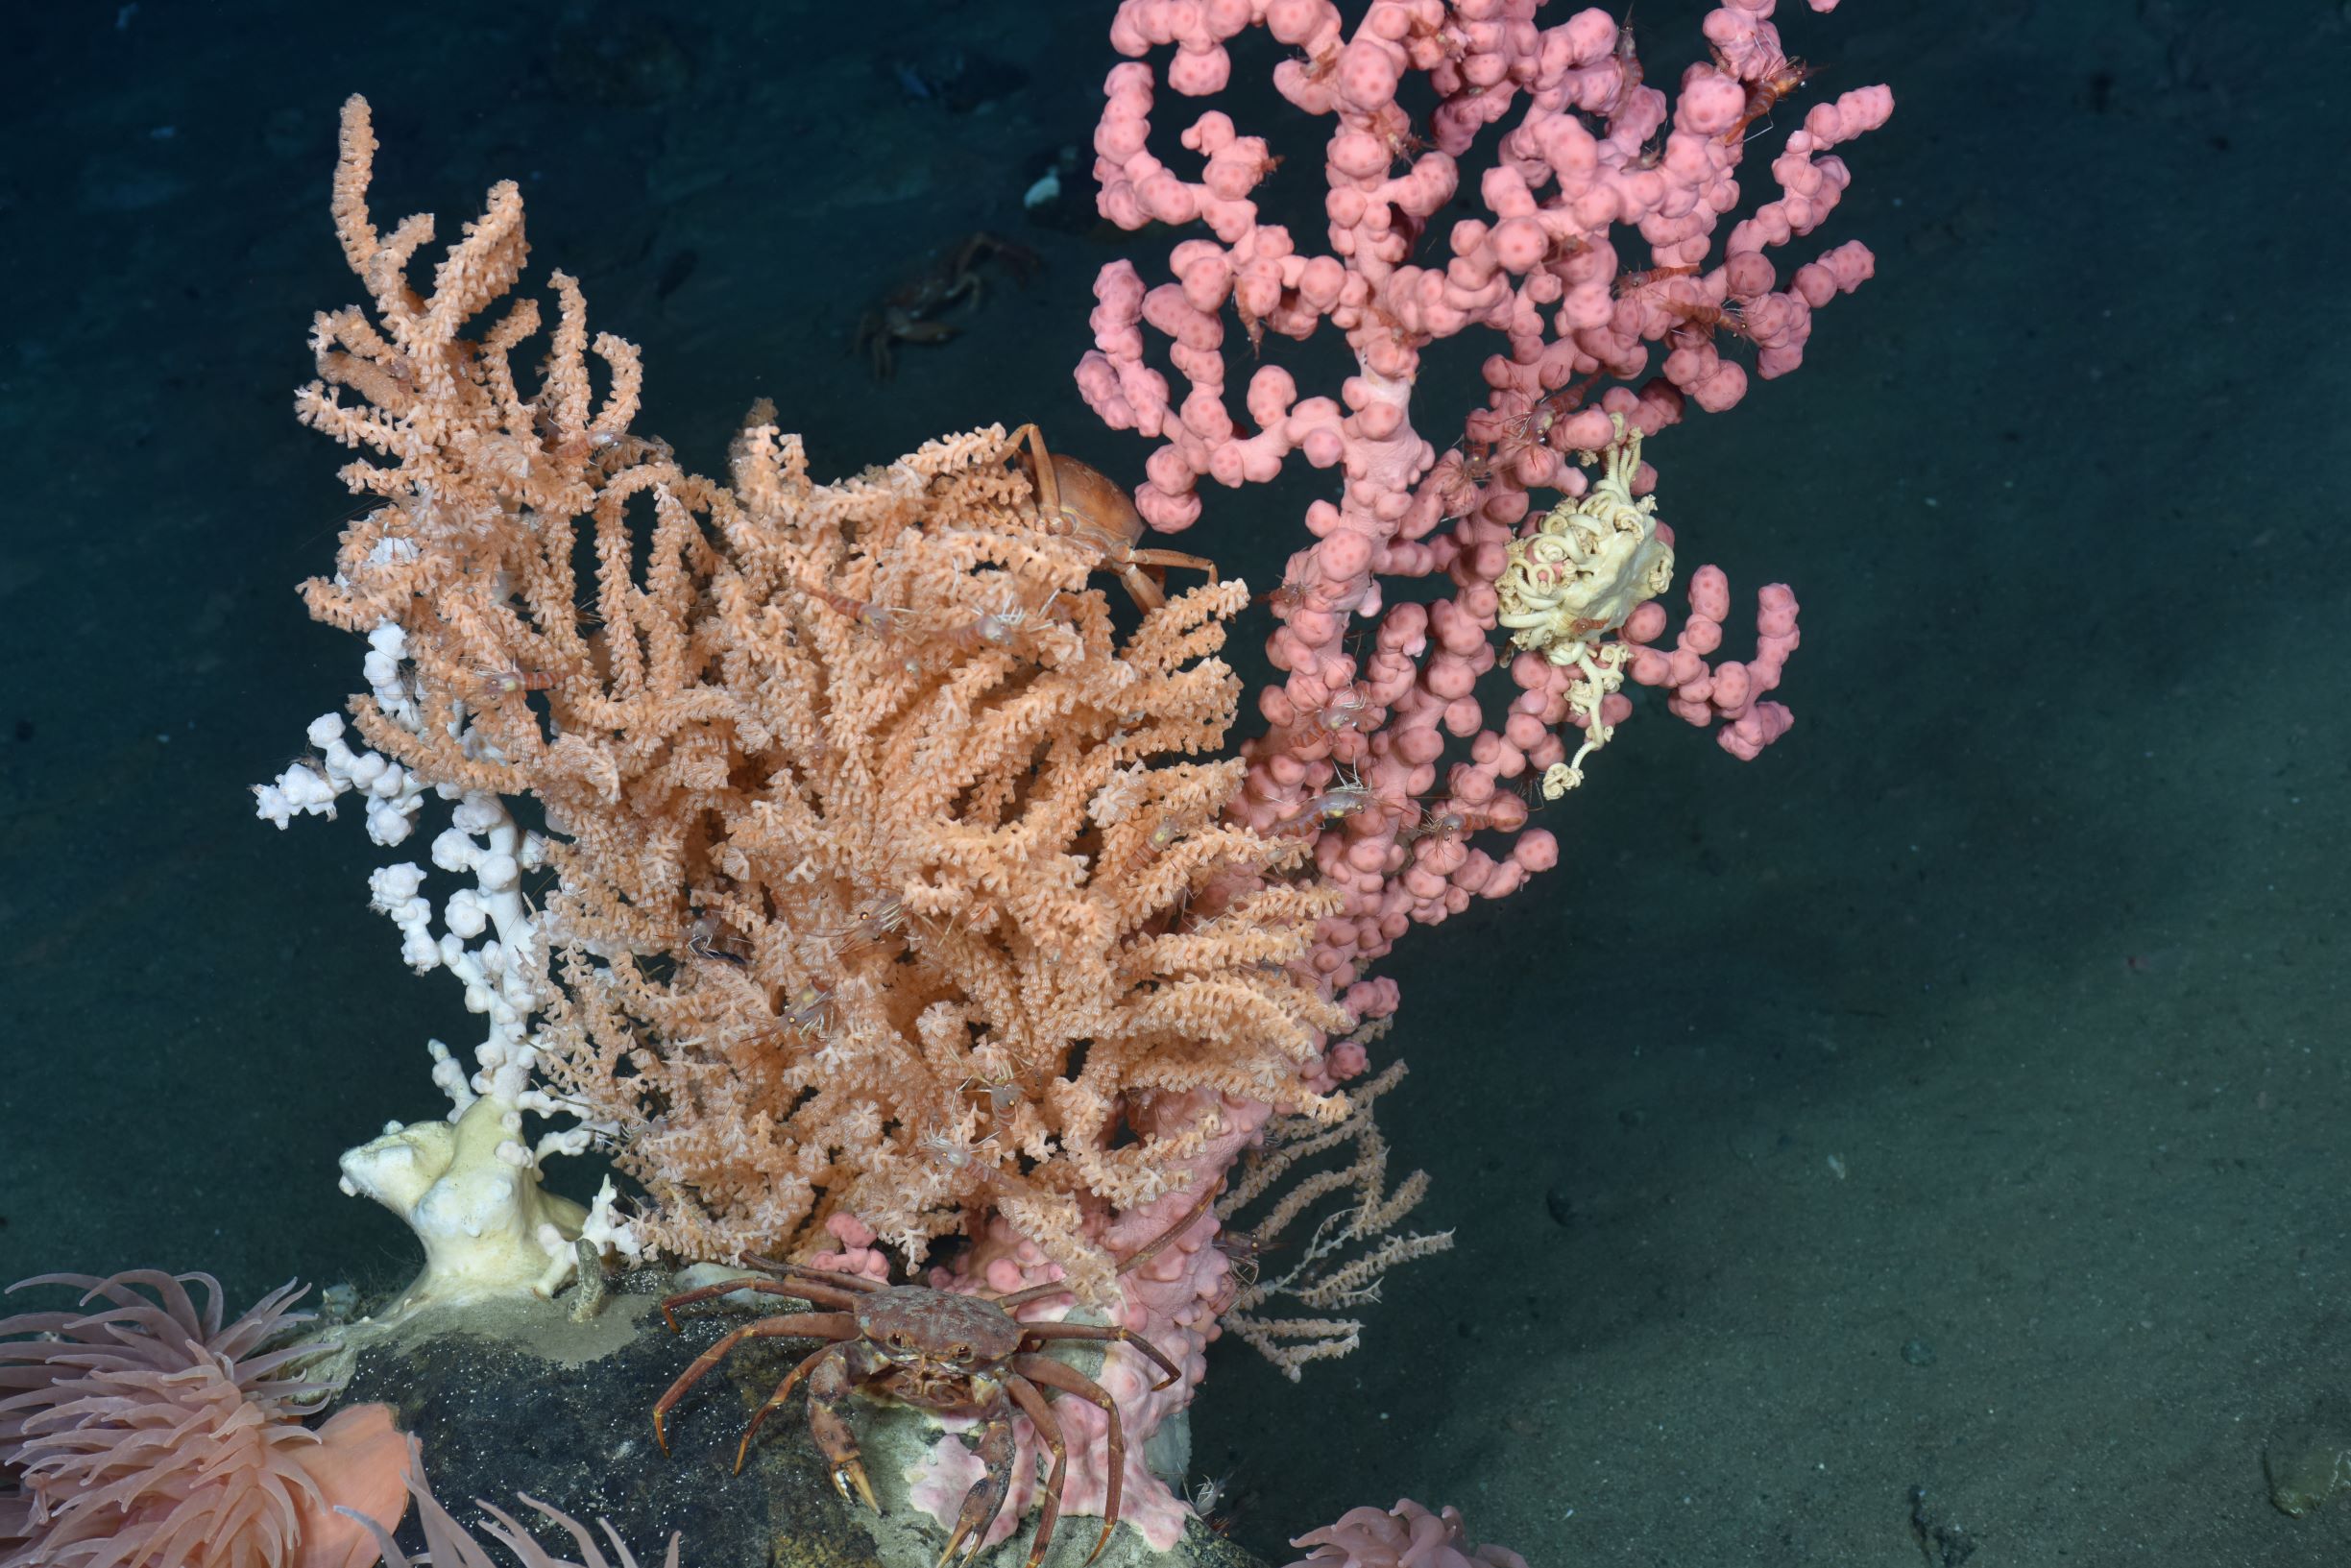 A crab sits at the base of a stand of coral, including Bubblegum coral, Paragorgia arborea, and Seacorn, Primnoa resedaeformis.